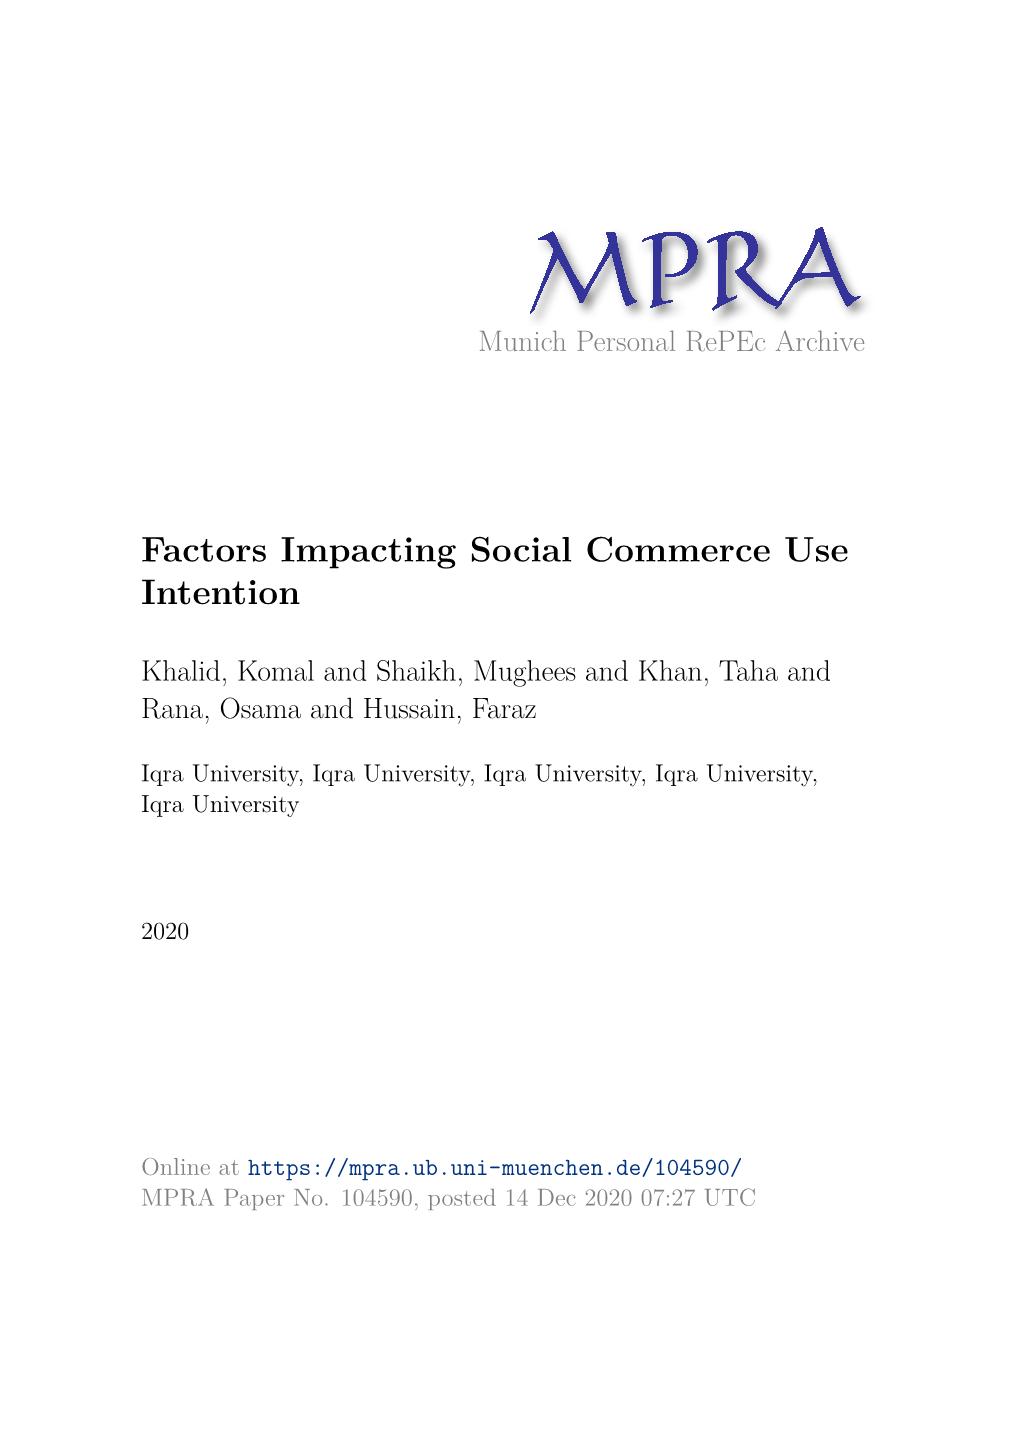 Factors Impacting Social Commerce Use Intention